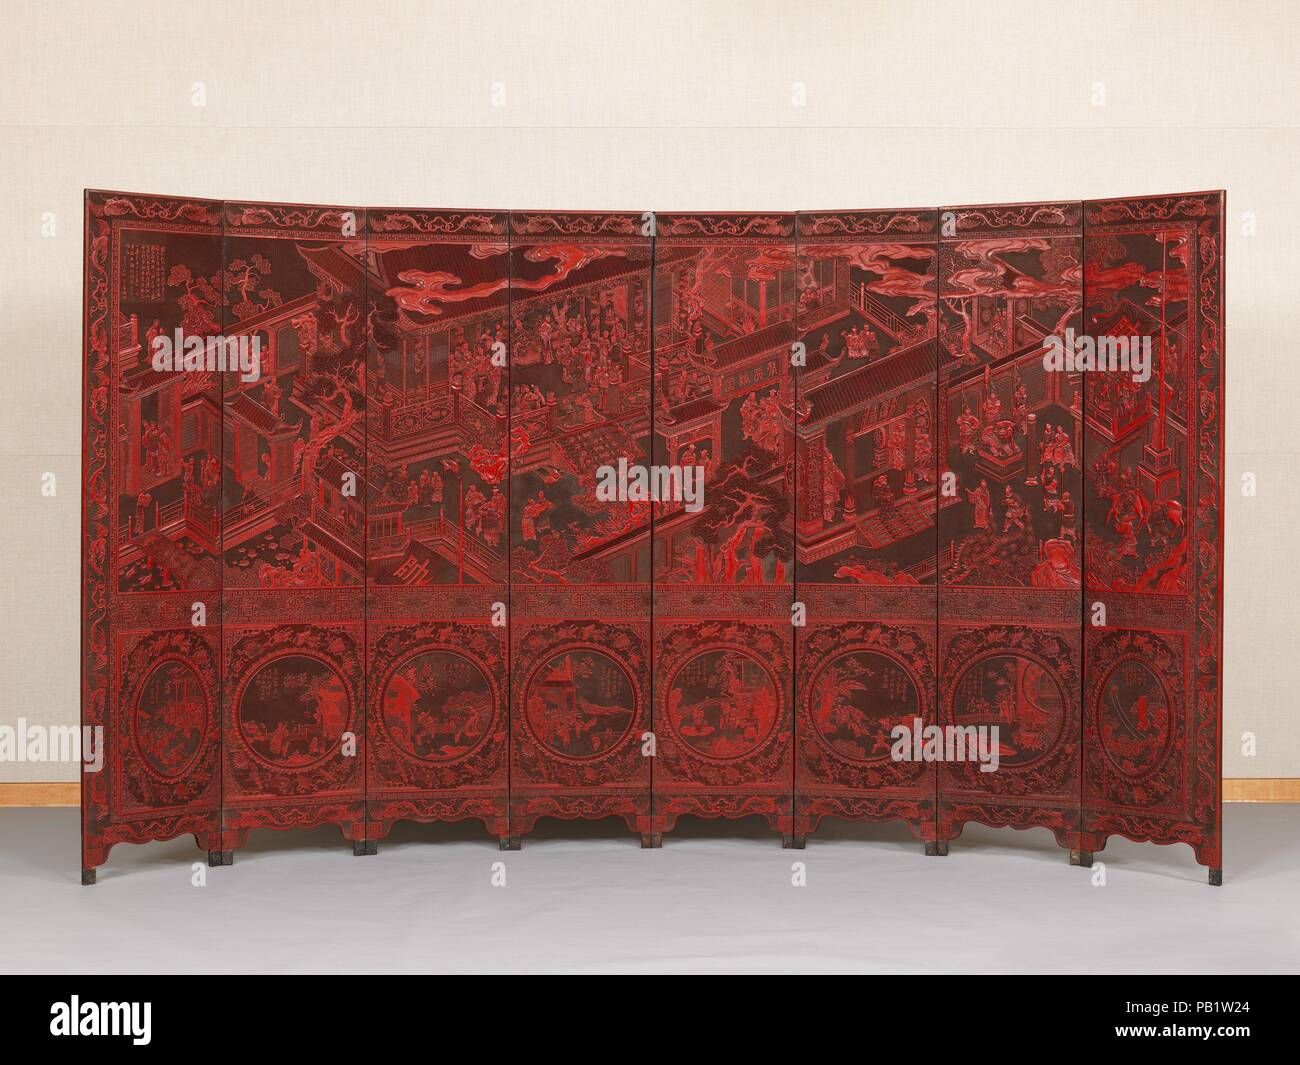 Screen with birthday celebration for General Guo Ziyi. Artist: Lu Guisheng (Chinese, active 1821-50). Culture: China. Dimensions: Open flat: 84 1/8 in. × 12 ft. 4 in. (213.7 × 375.9 cm)  Open curved: 84 1/8 in. × 11 ft. 3 13/16 in. × 35 7/16 in. (213.7 × 345 × 90 cm). Date: mid-19th century.  The inscription in the upper right indicates that the screen was made in honor of a certain General Zhen, most likely upon an important birthday, such as his sixtieth. The primary decoration records a celebration for Guo Ziyi (697-781), one of the most famous generals in Chinese history--an obvious compli Stock Photo